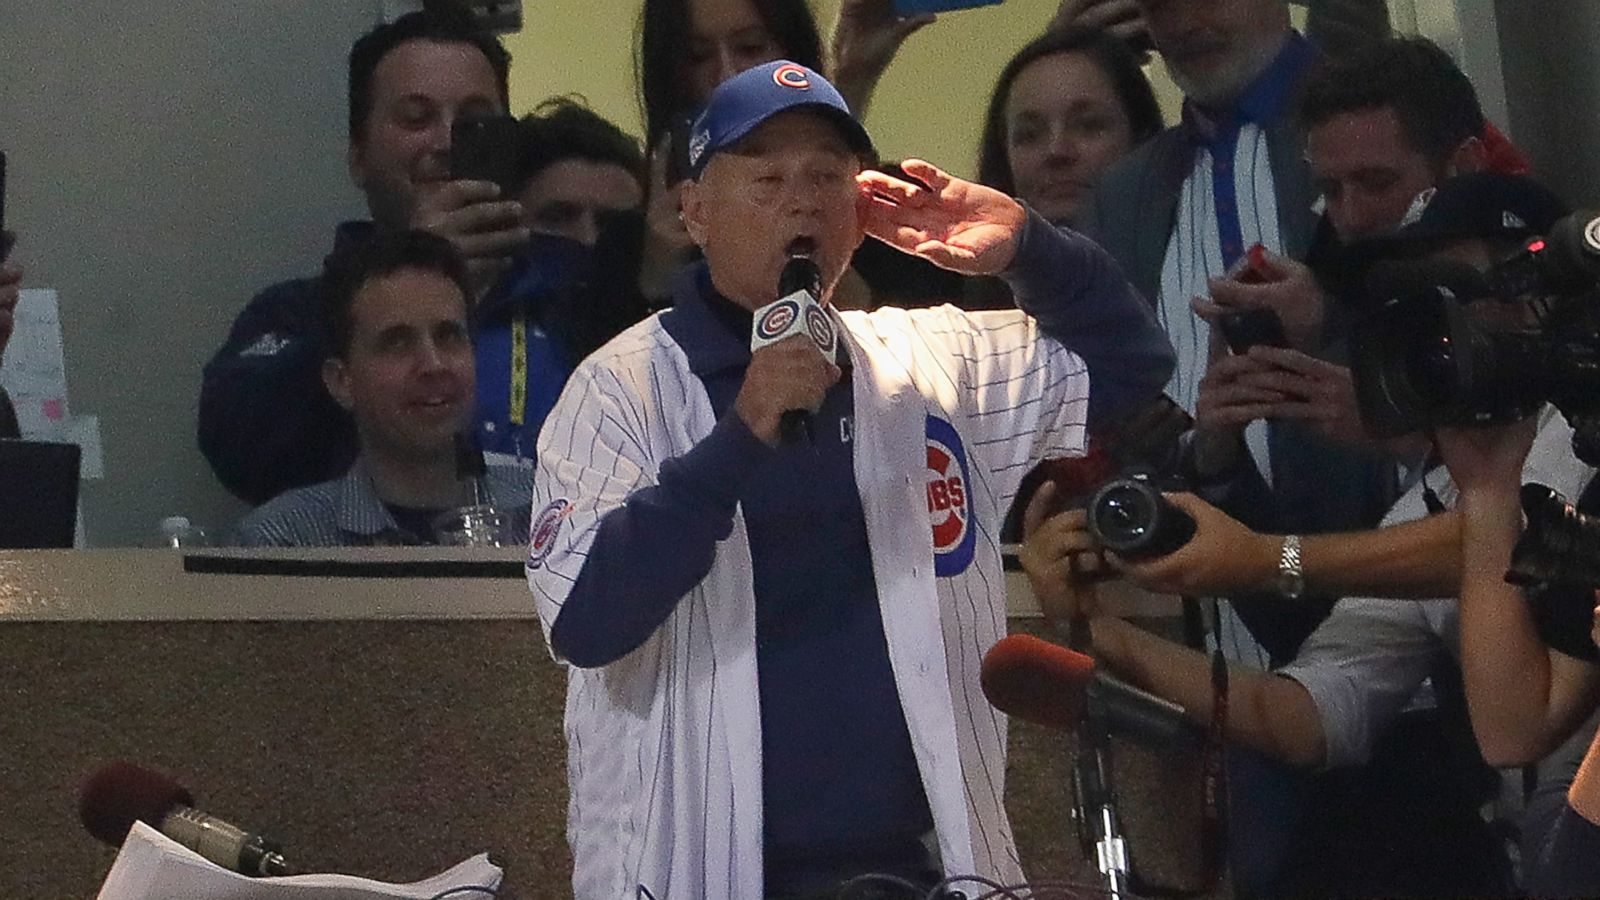 Cubs fan Bill Murray sings 'Take Me Out to the Ballgame' at Wrigley Field 